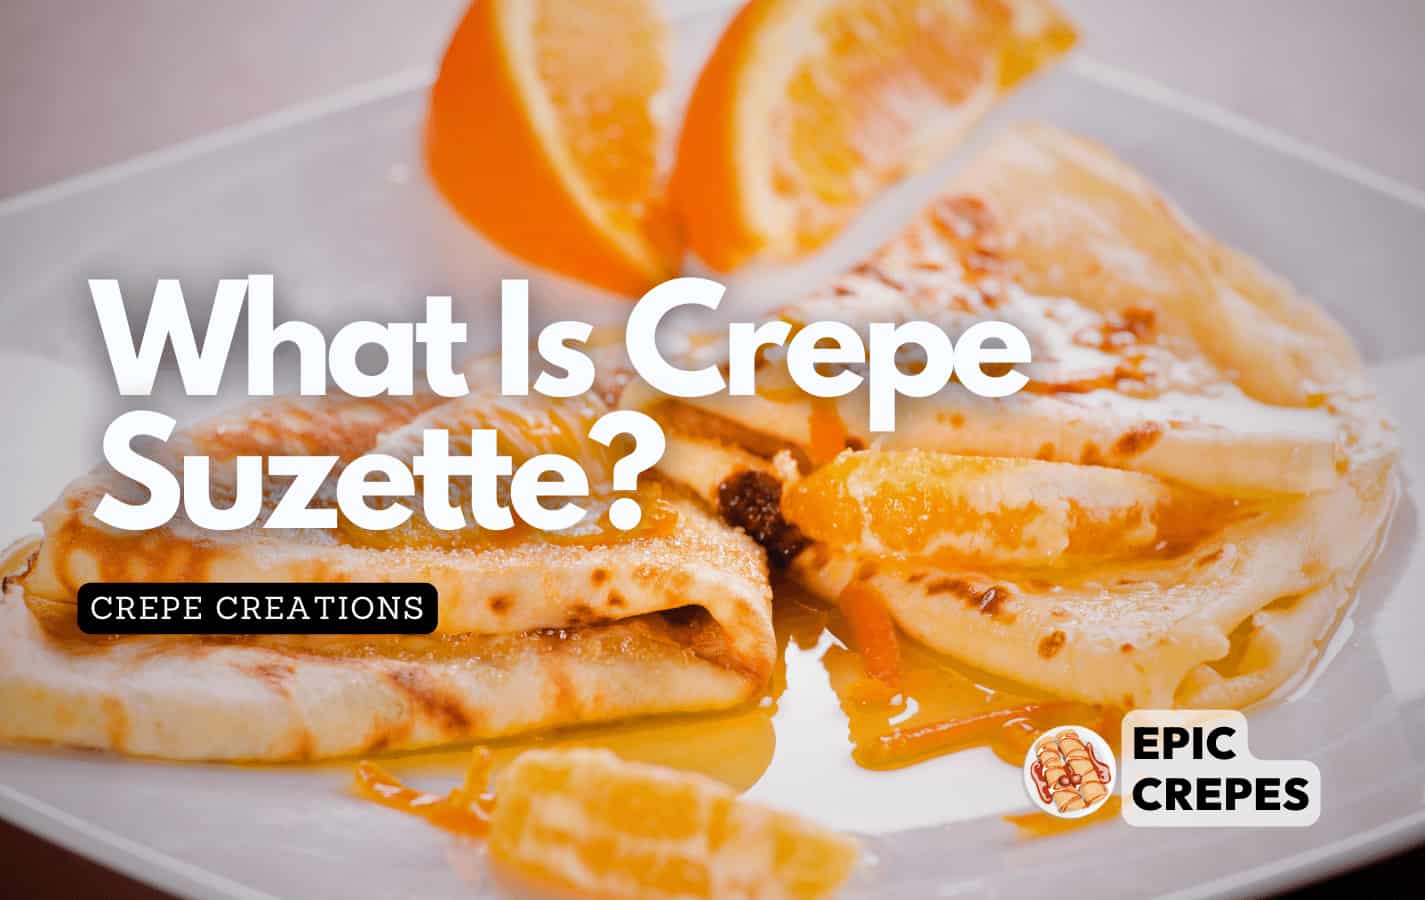 Crepe Suzette on a plate with fresh orange slices as a garnish